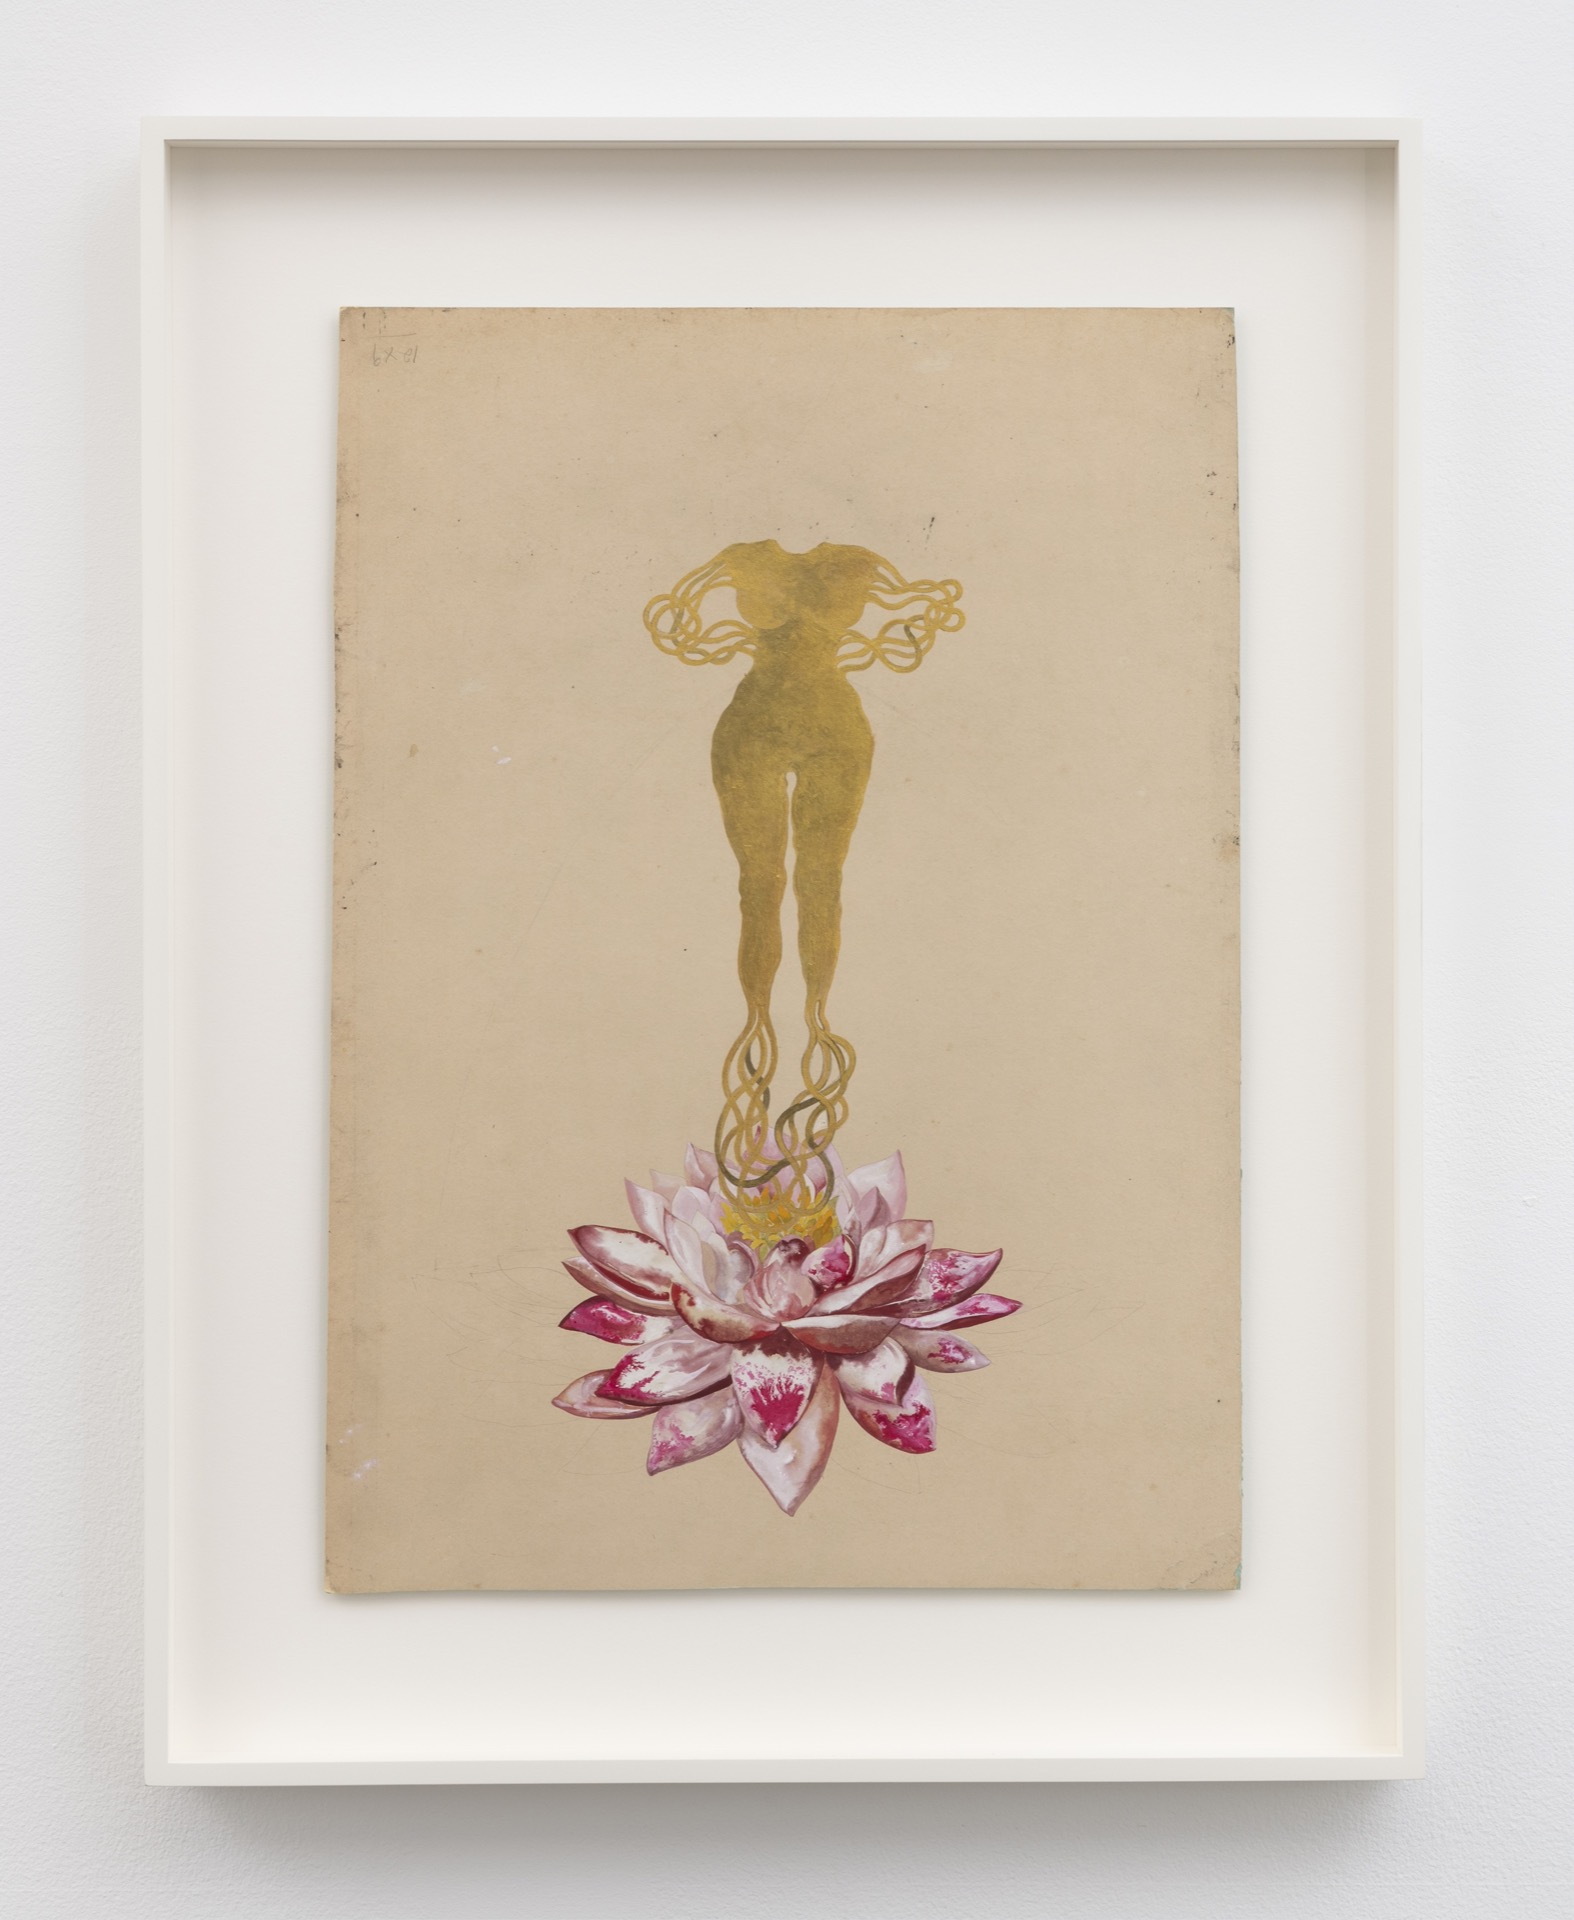 A gold, feminine figure without a head and connected tendrils in place of hands and feet emerging from a pink, blossoming lotus flower.